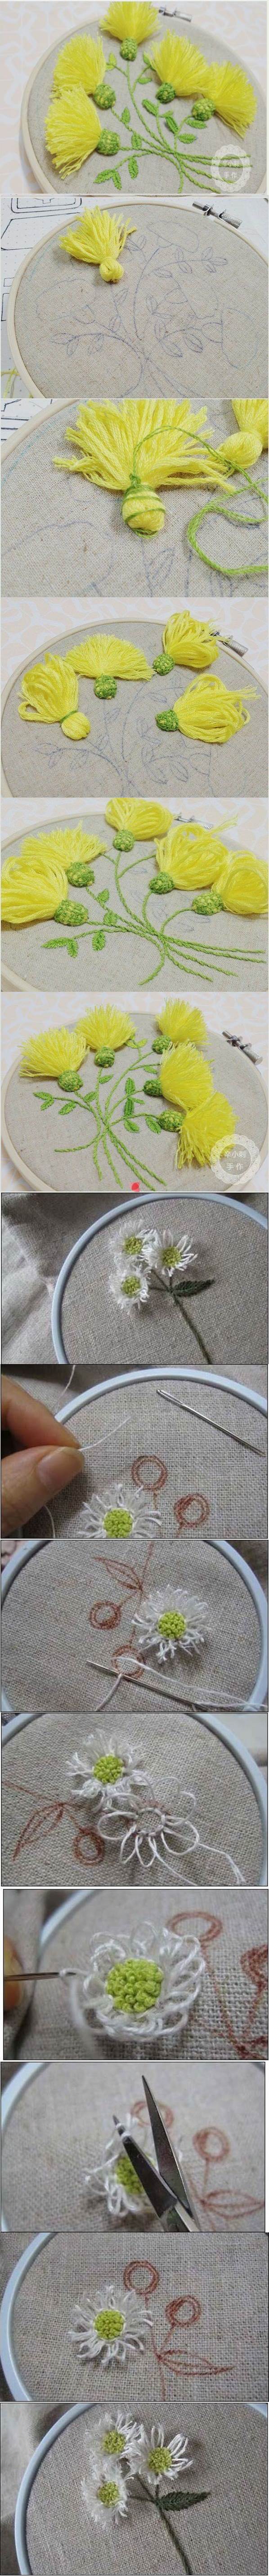 DIY Beautiful Embroidered Flowers 2